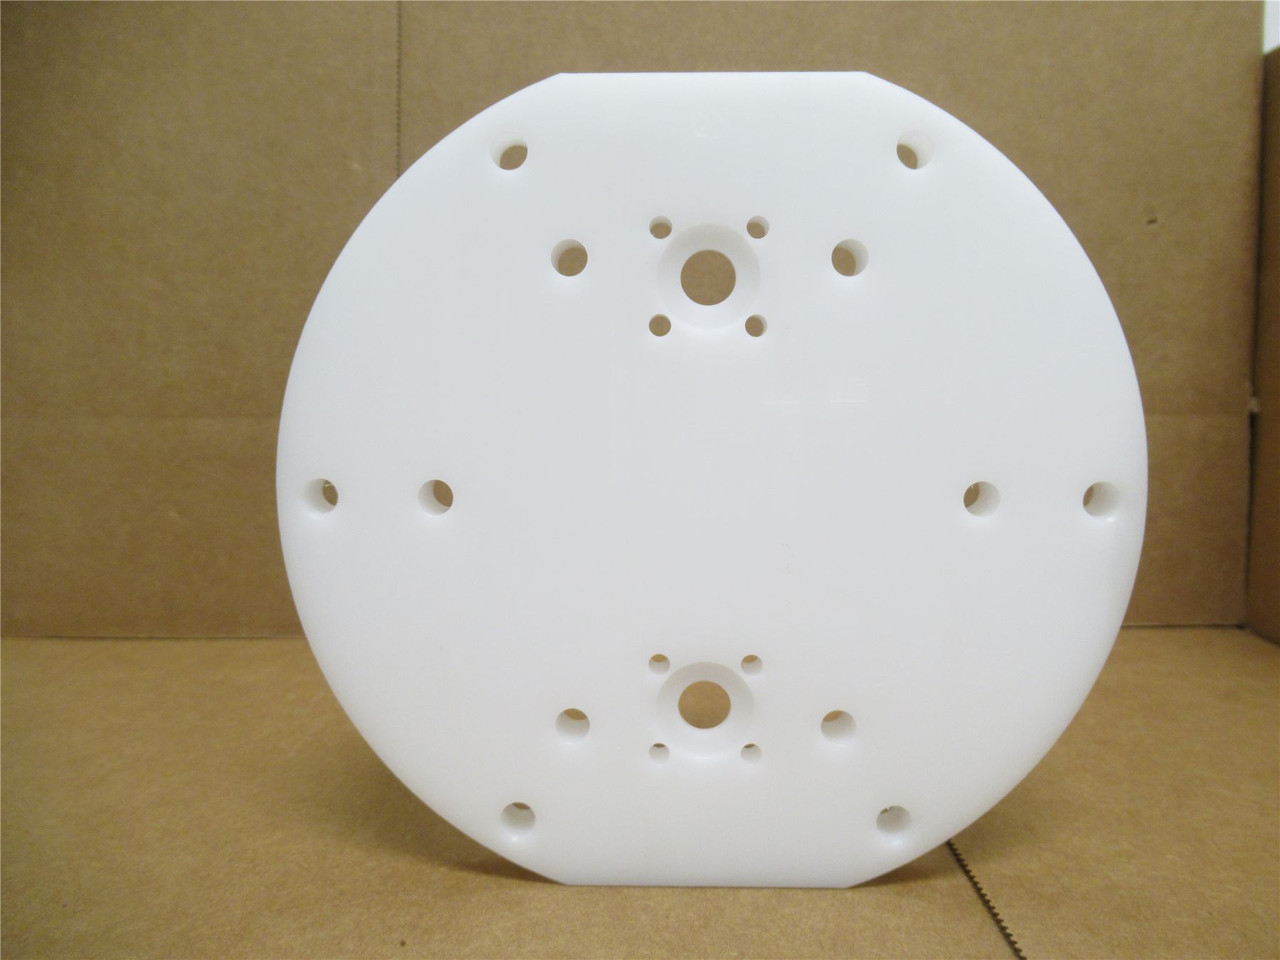 Cooling Applied Technology 52268; HPVC Paump Cap Top Plate